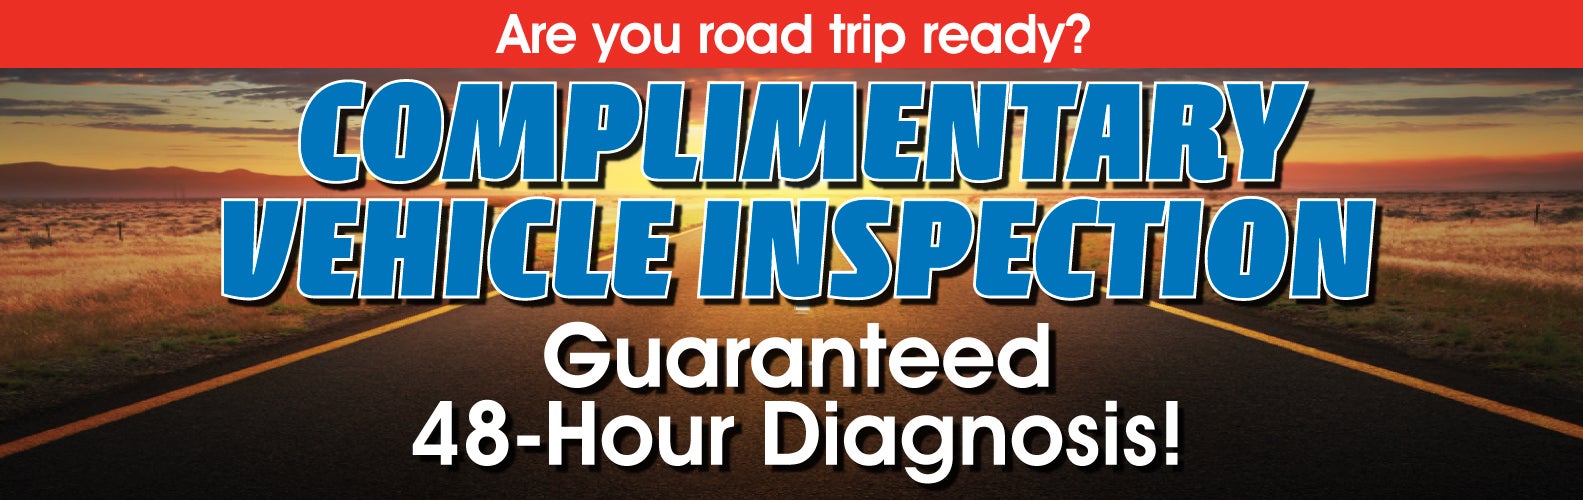 COMPLIMENTARY VEHICLE INSPECTION